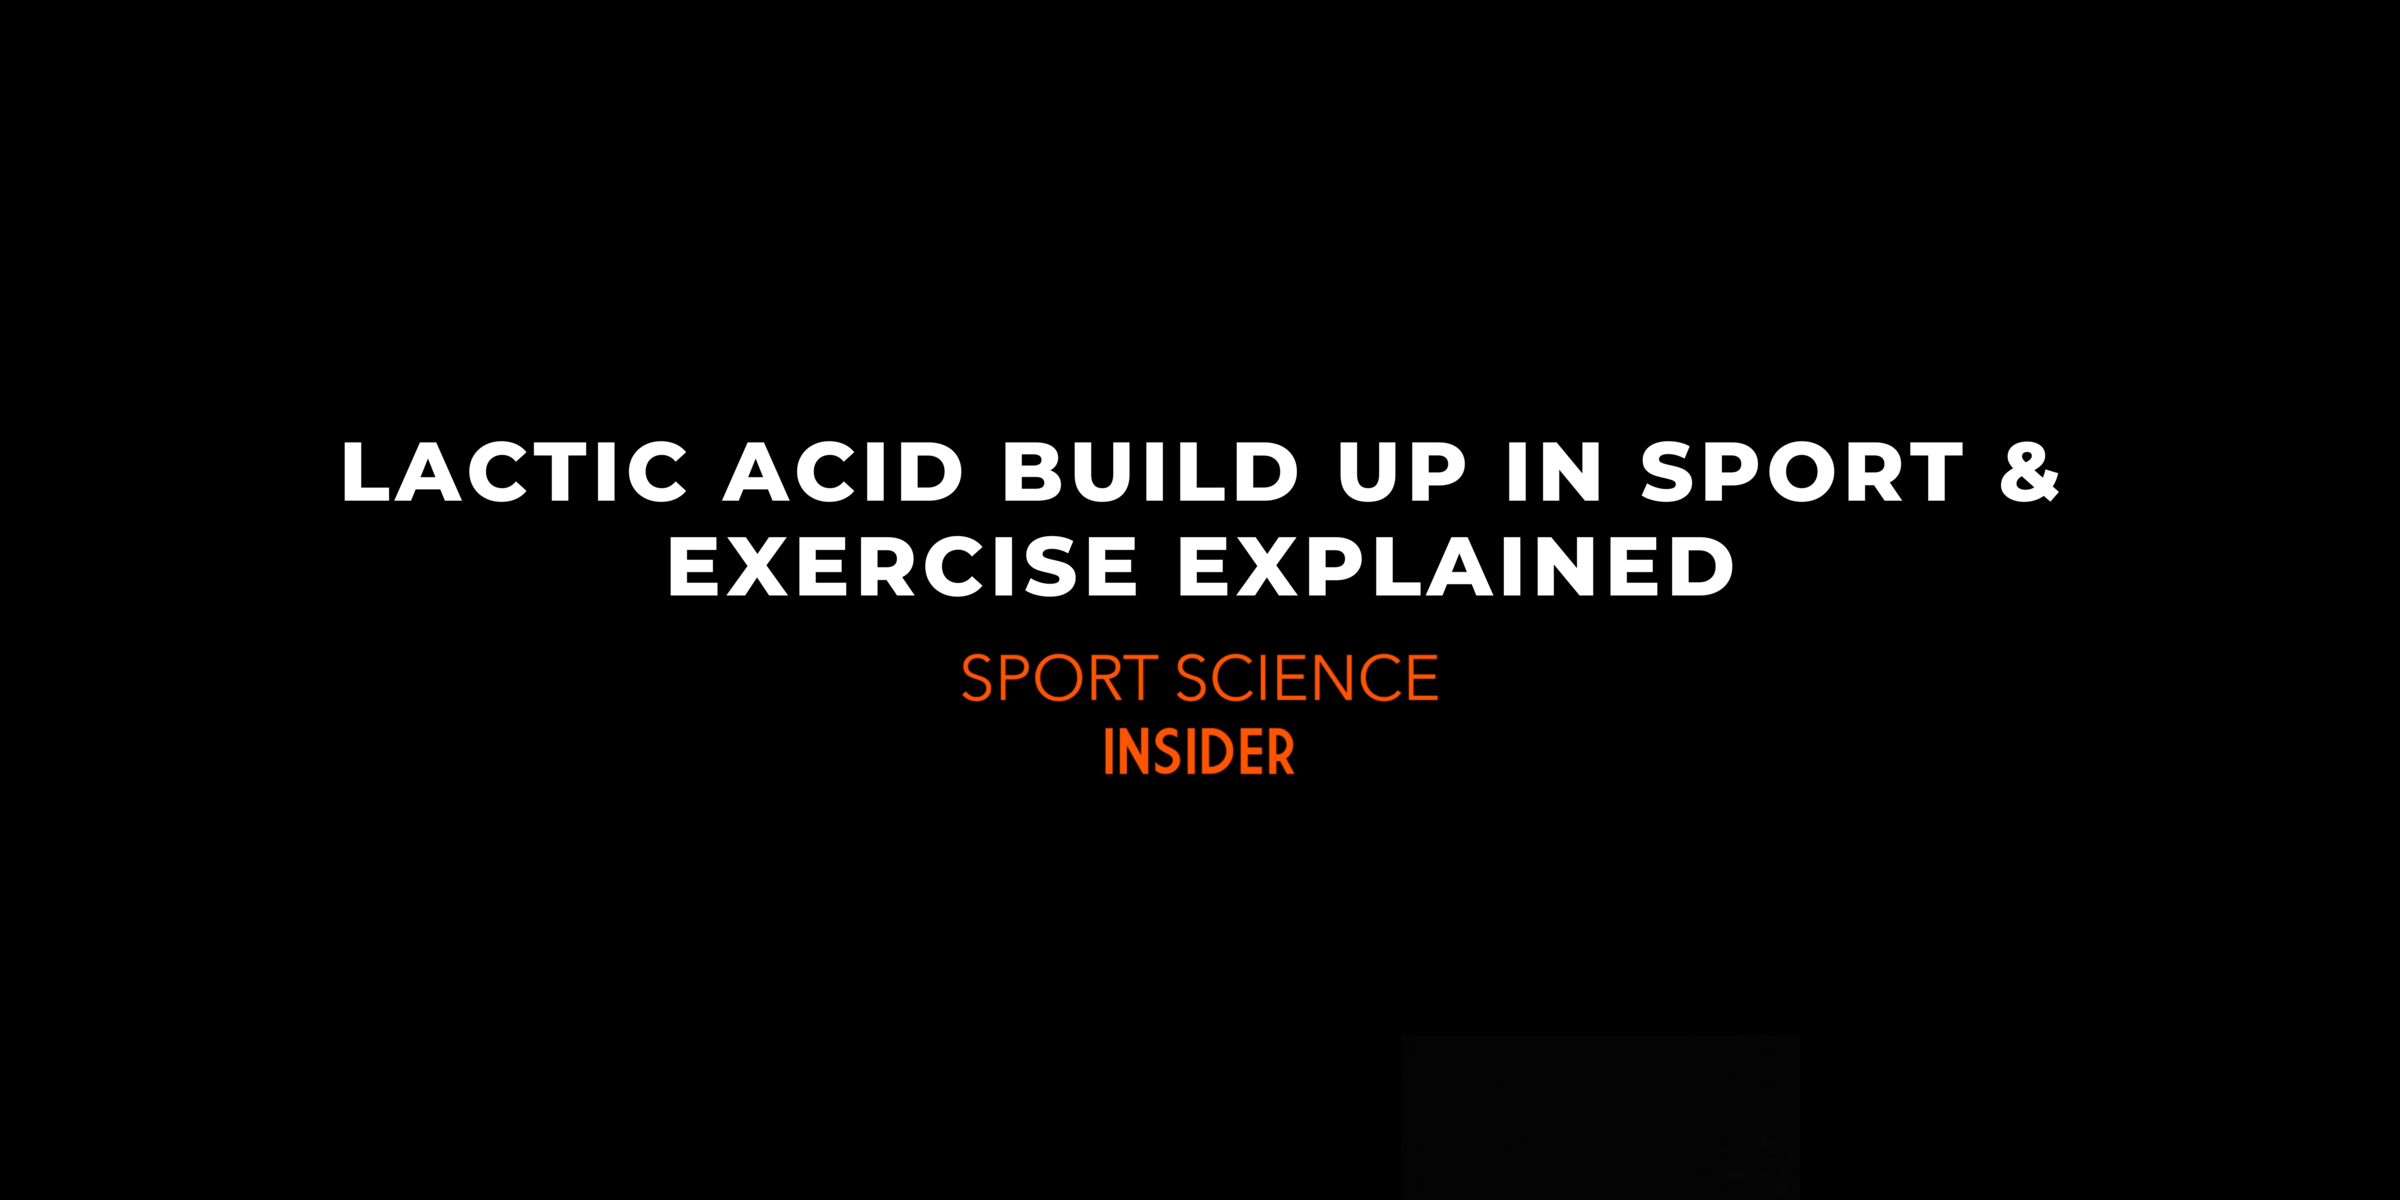 Lactic Acid Build Up in Sport & Exercise Explained